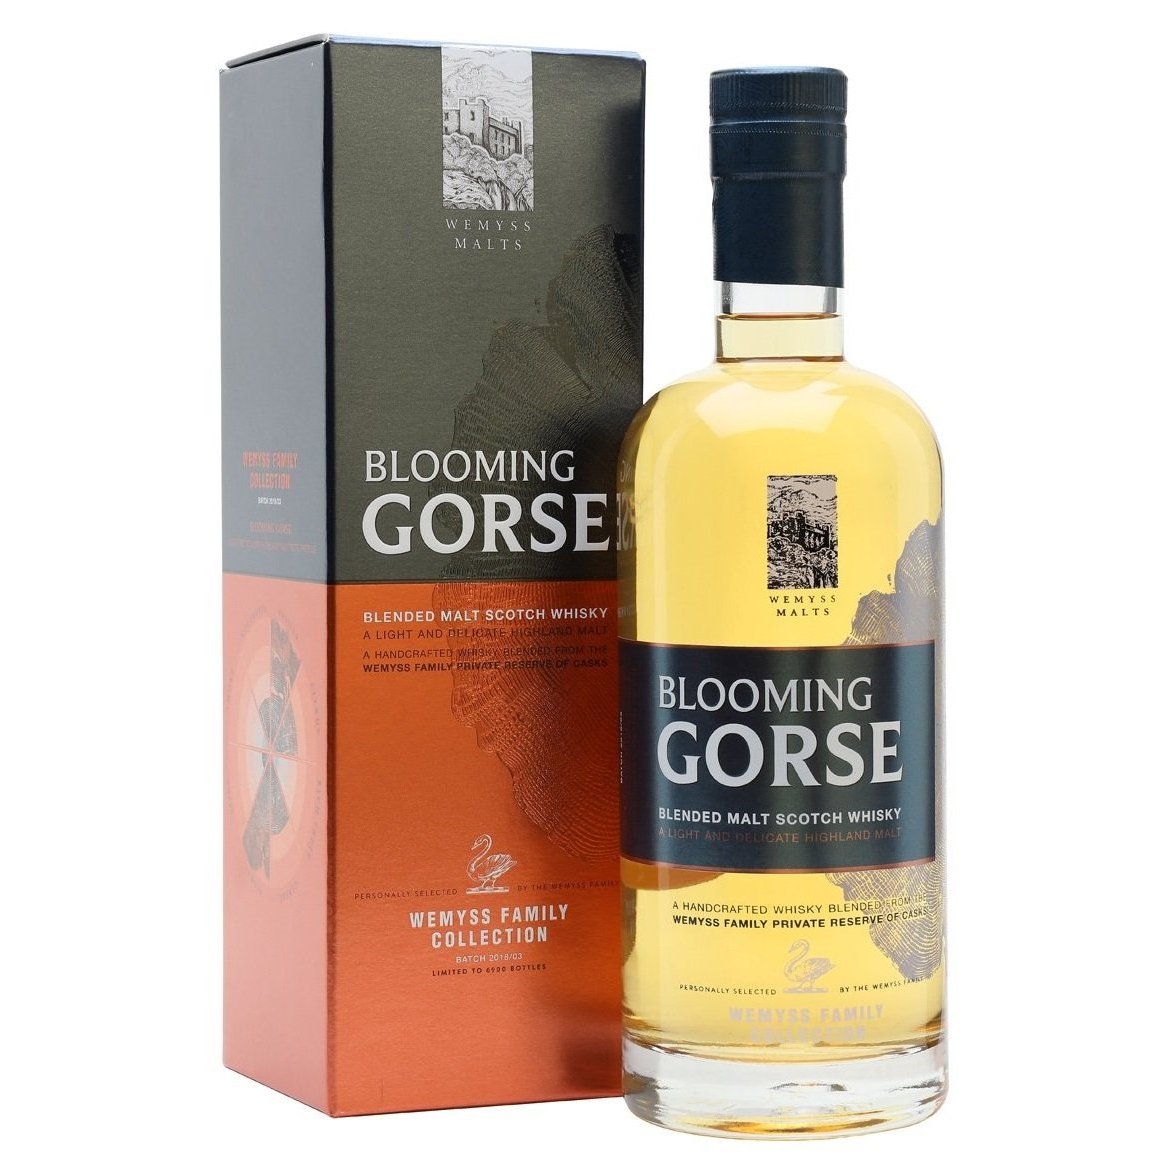 Wemyss Malts BLOOMING GORSE Blended Malt Scotch Whisky 46% Vol. 0,7l in Giftbox